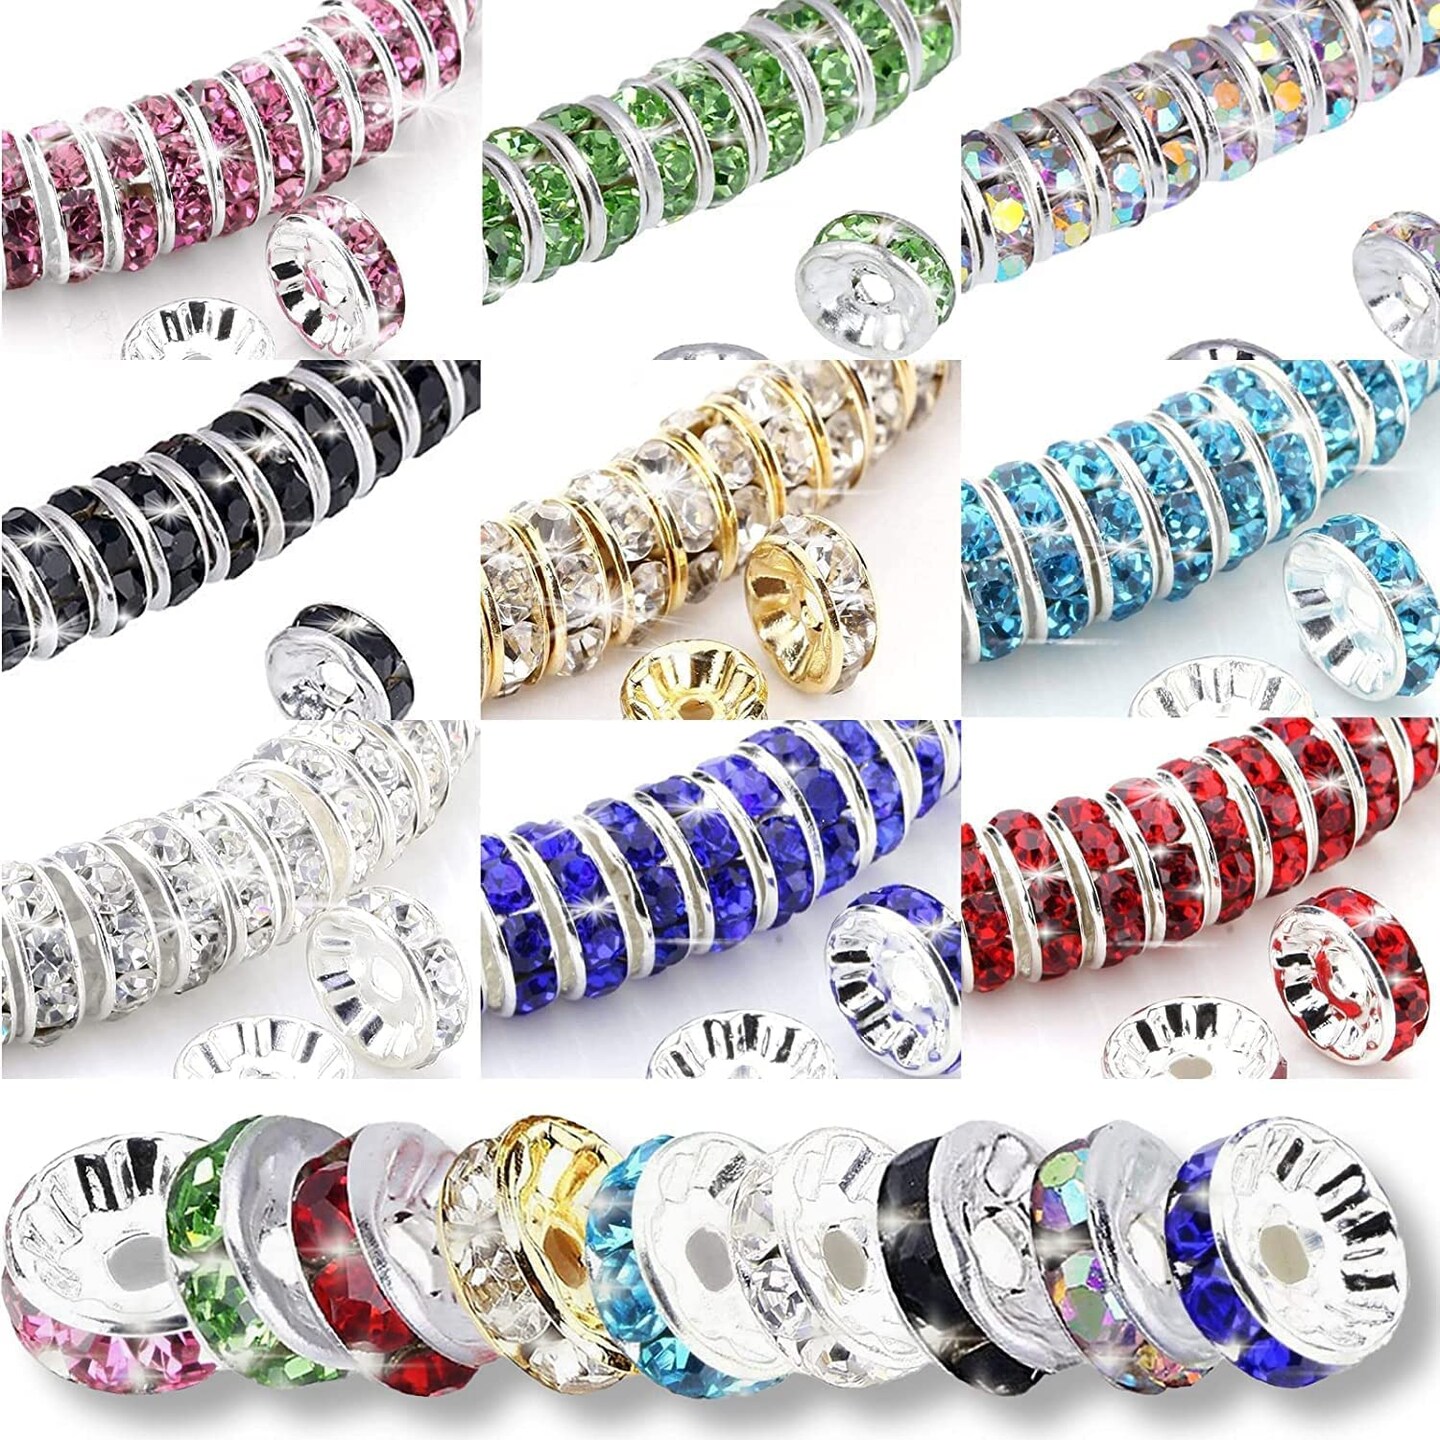 1080Pcs 8mm Rhinestone Spacer Beads, Crystal Glass Beads, Spacer Beads for  Jewelry Making, Beads for Jewelry Making Necklaces, Bracelet Pendants, 9  Colors